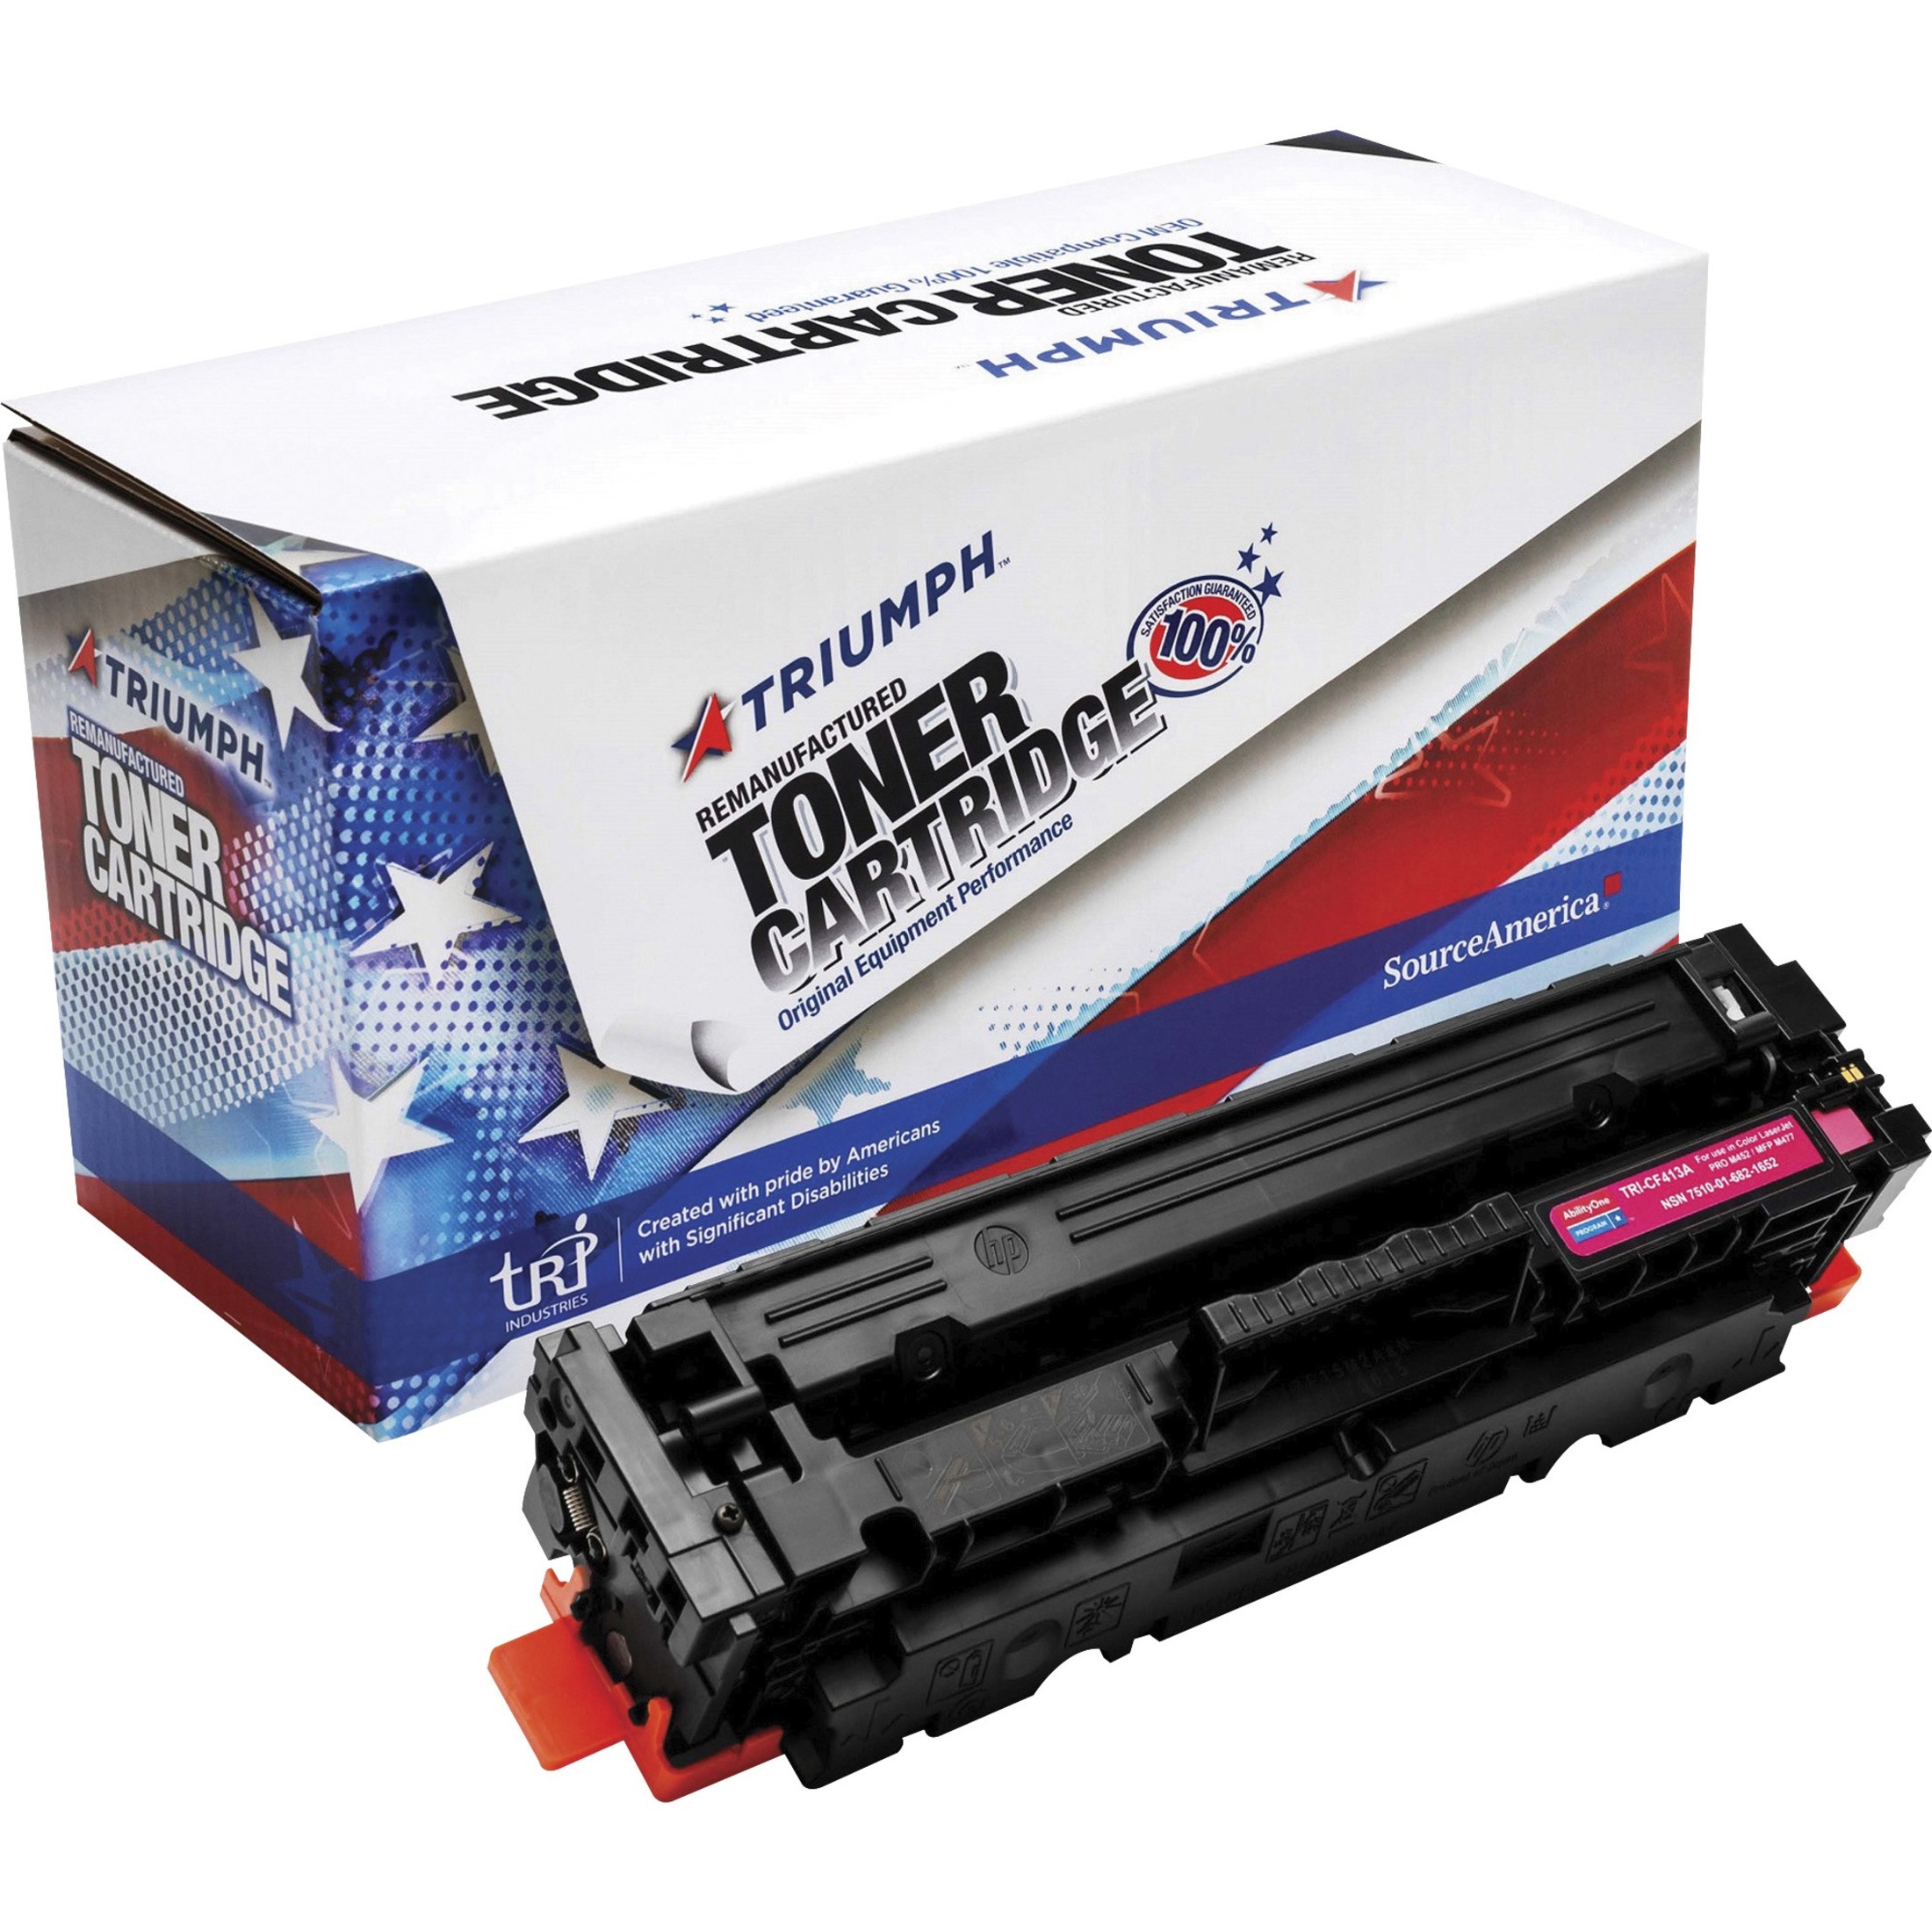 SKILCRAFT, NSN6821652, Remanufactured HP 410A Toner Cartridge, 1 Each - image 1 of 2